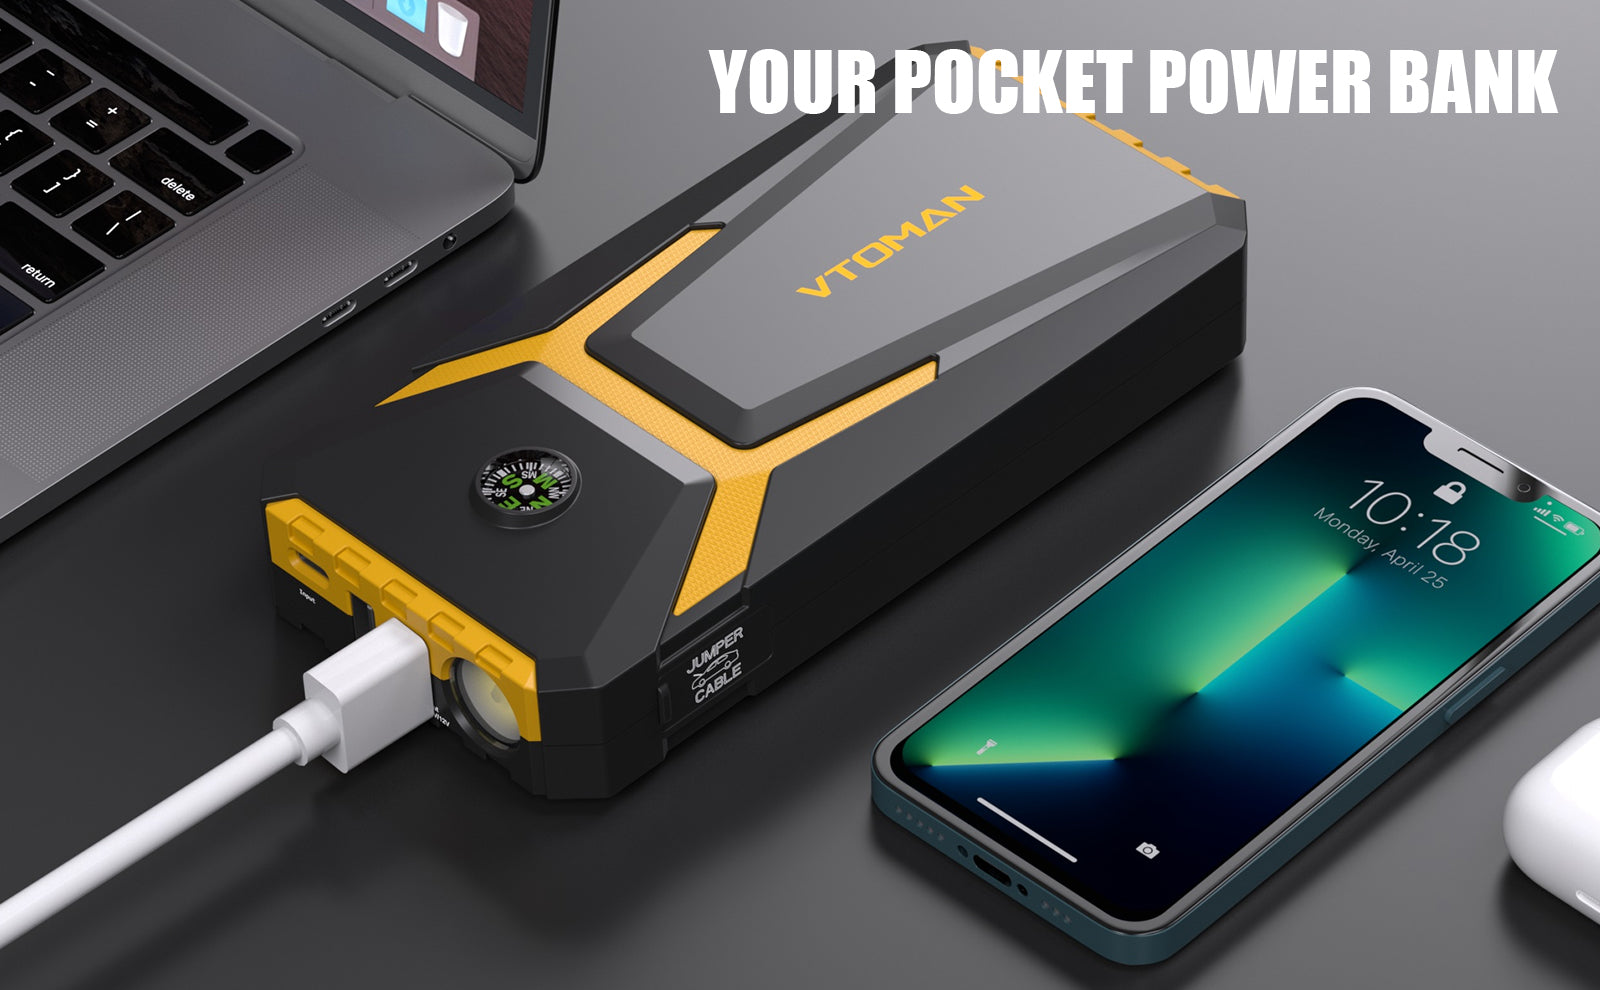 V6 Pro JUMP Starter is also a power bank